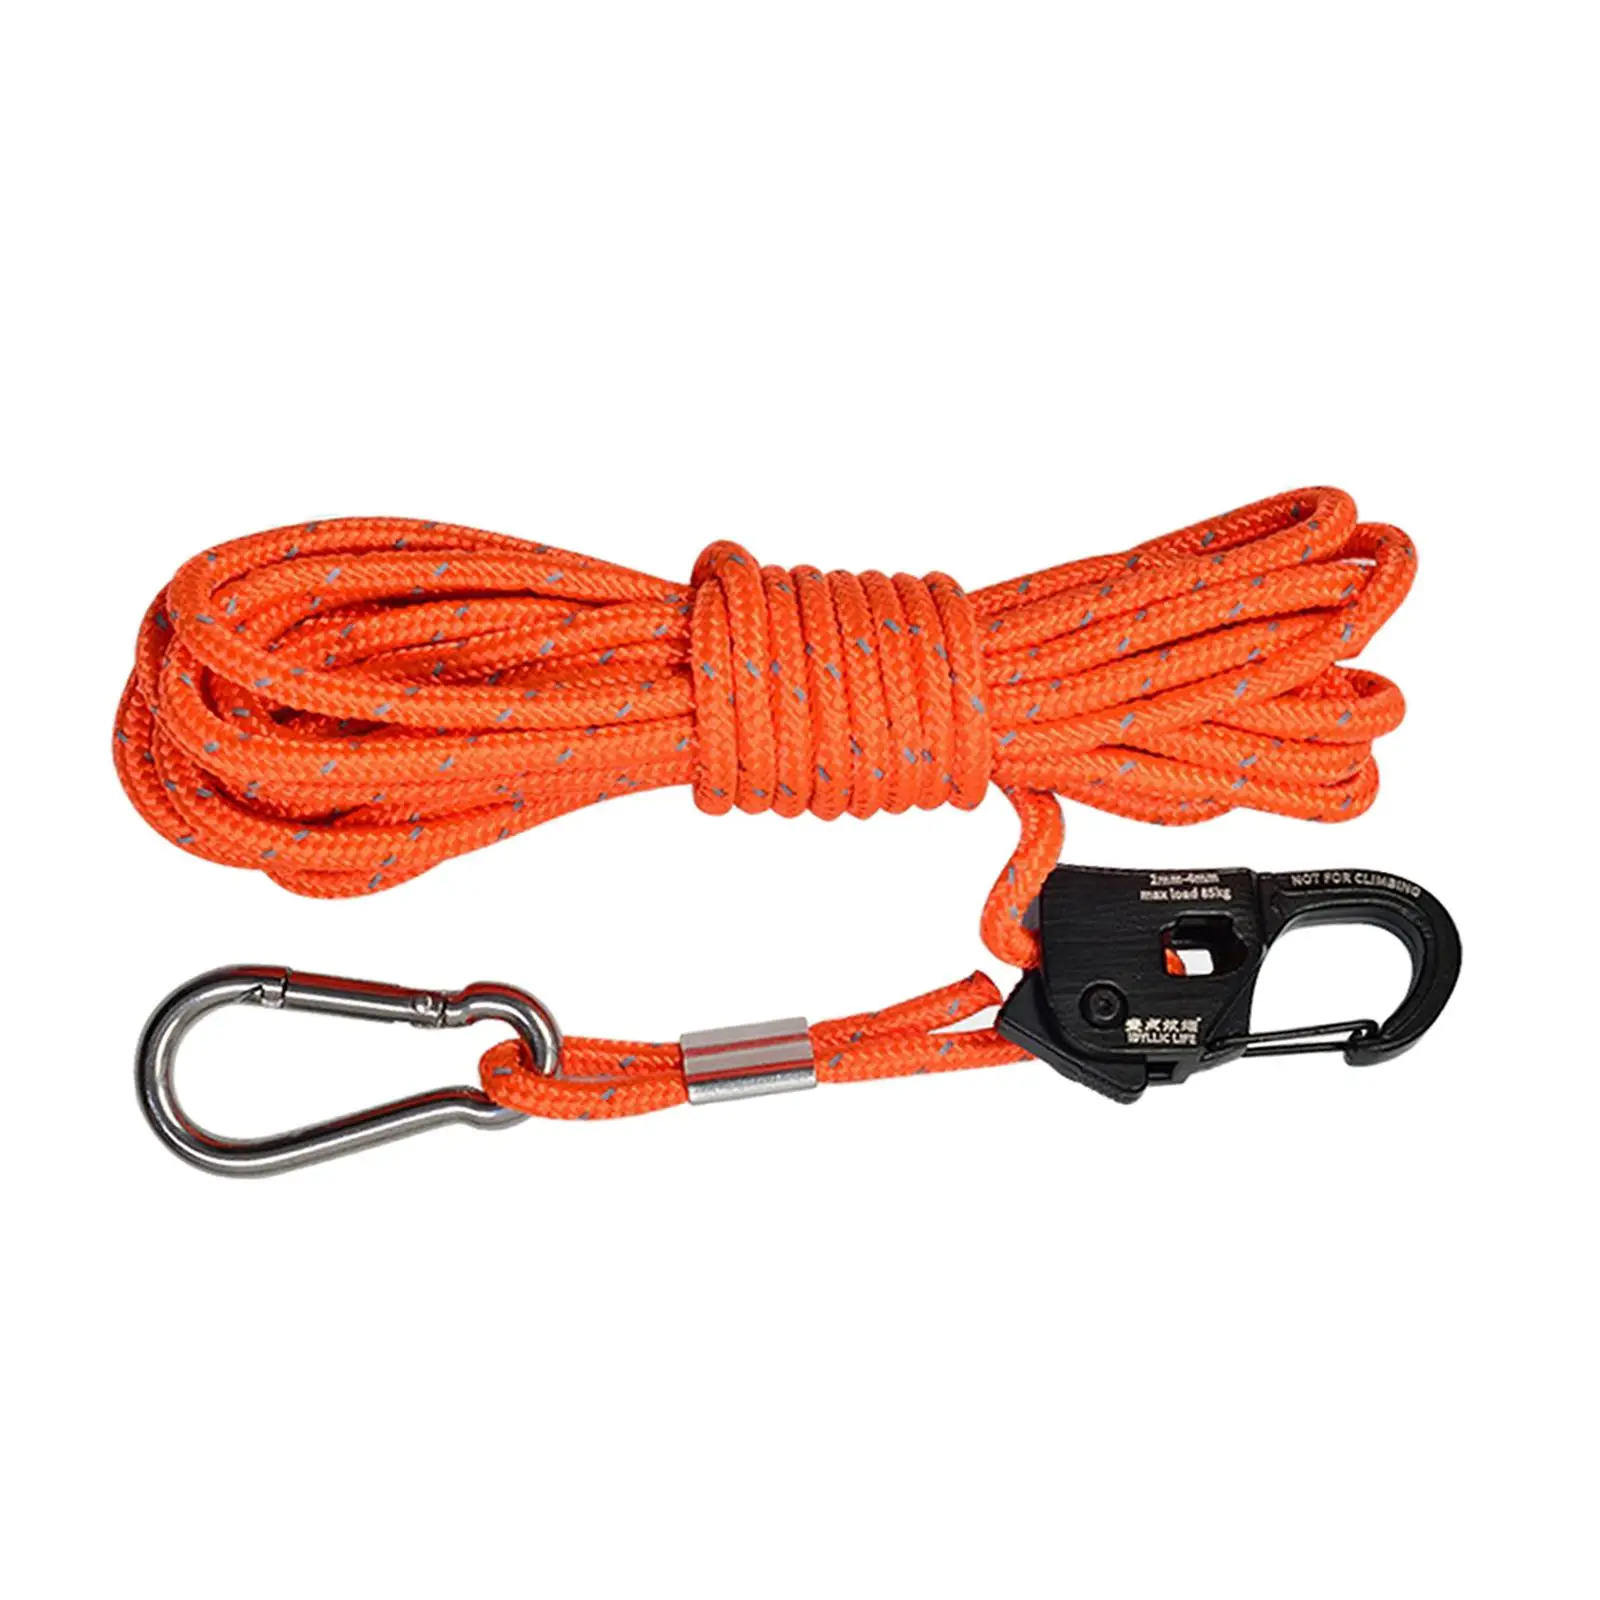 4mm Tent Guy Rope with Pulley Length 13ft Nylon Lanyard with Self Locking Regulator for Canopy Awning Backpacking Gardening Tent